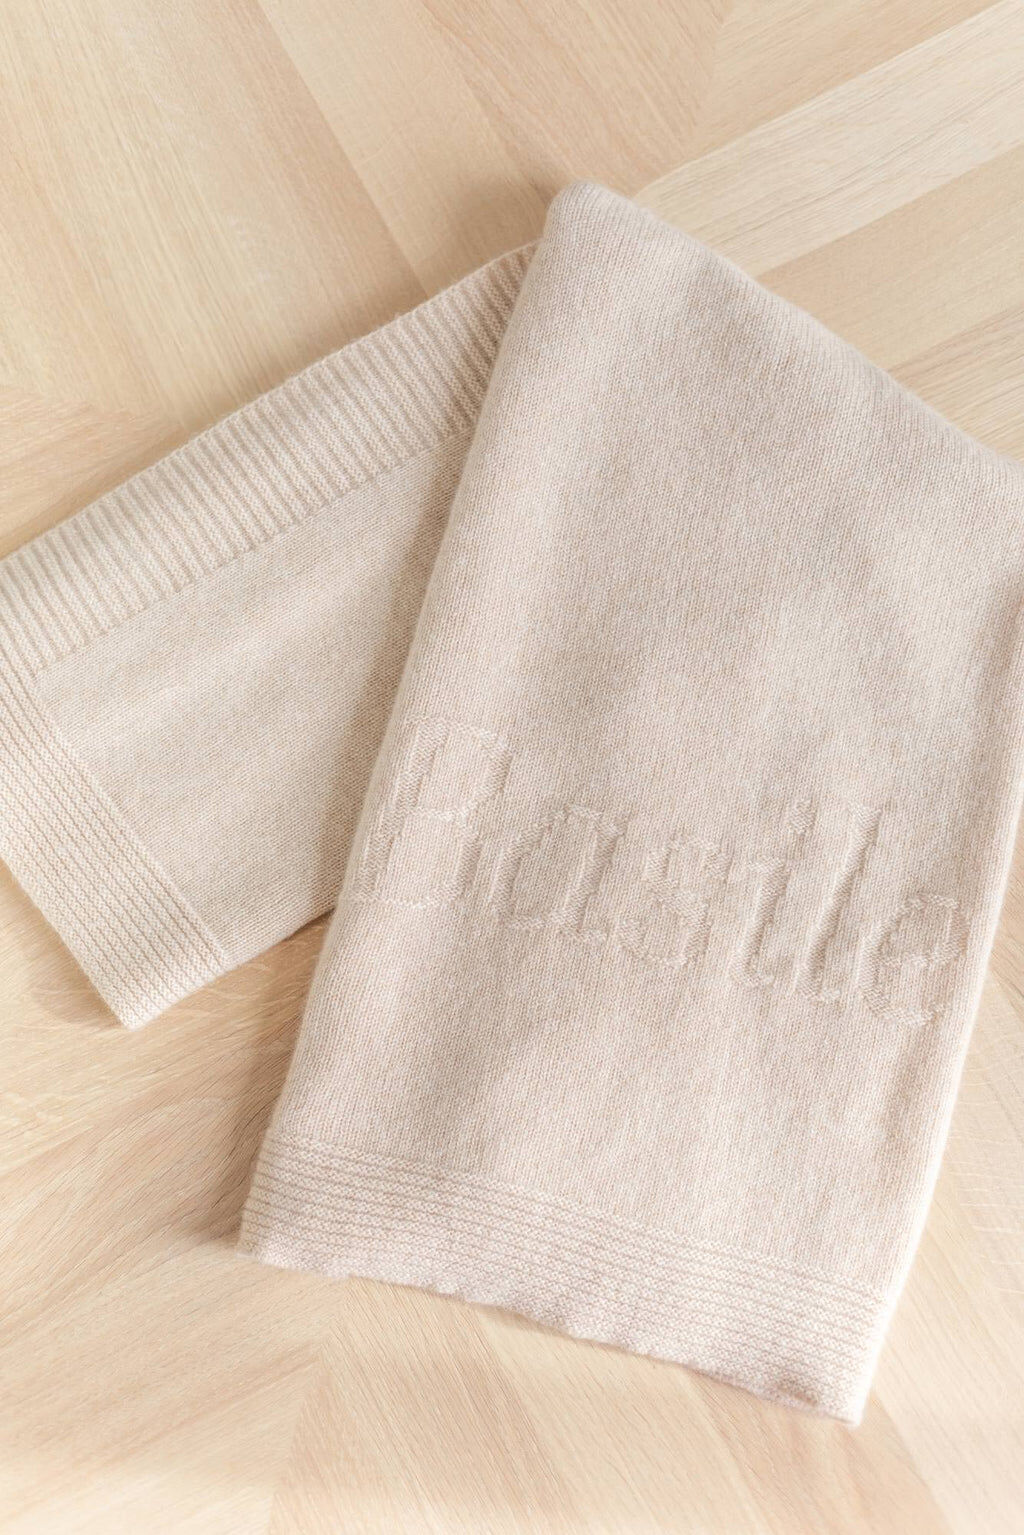 Blanket Personalized - Cashmere Beige